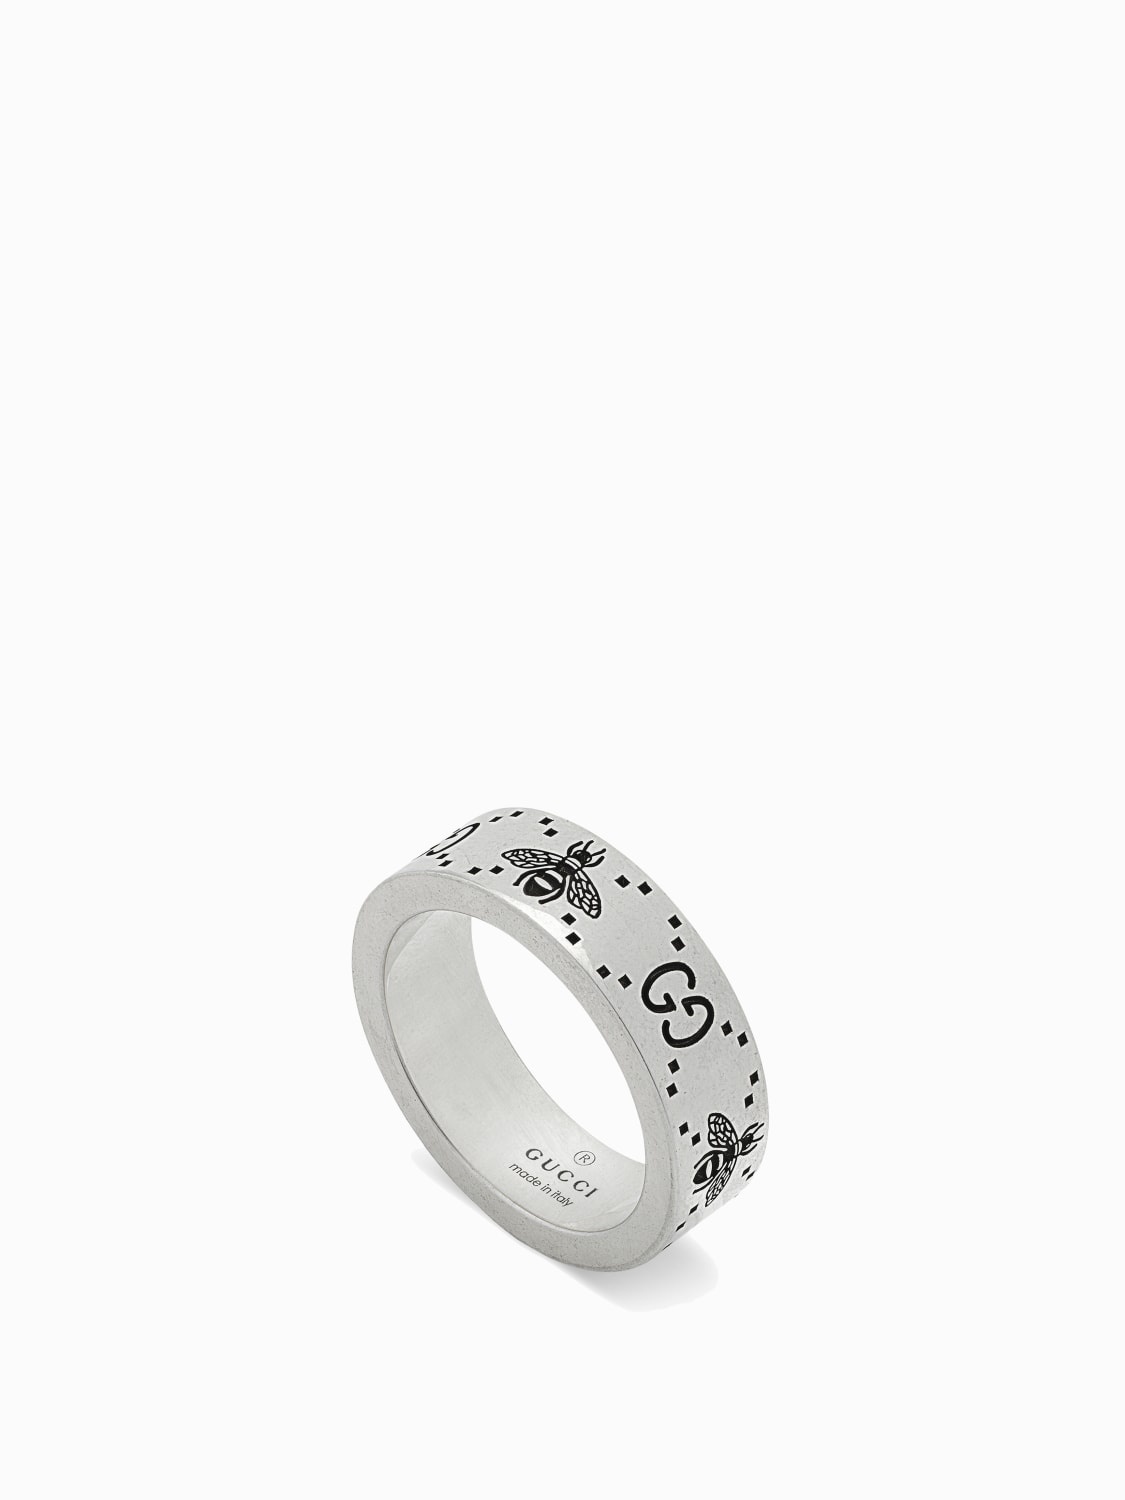 Gucci ring in silver with GG logo and bee engravings - 1